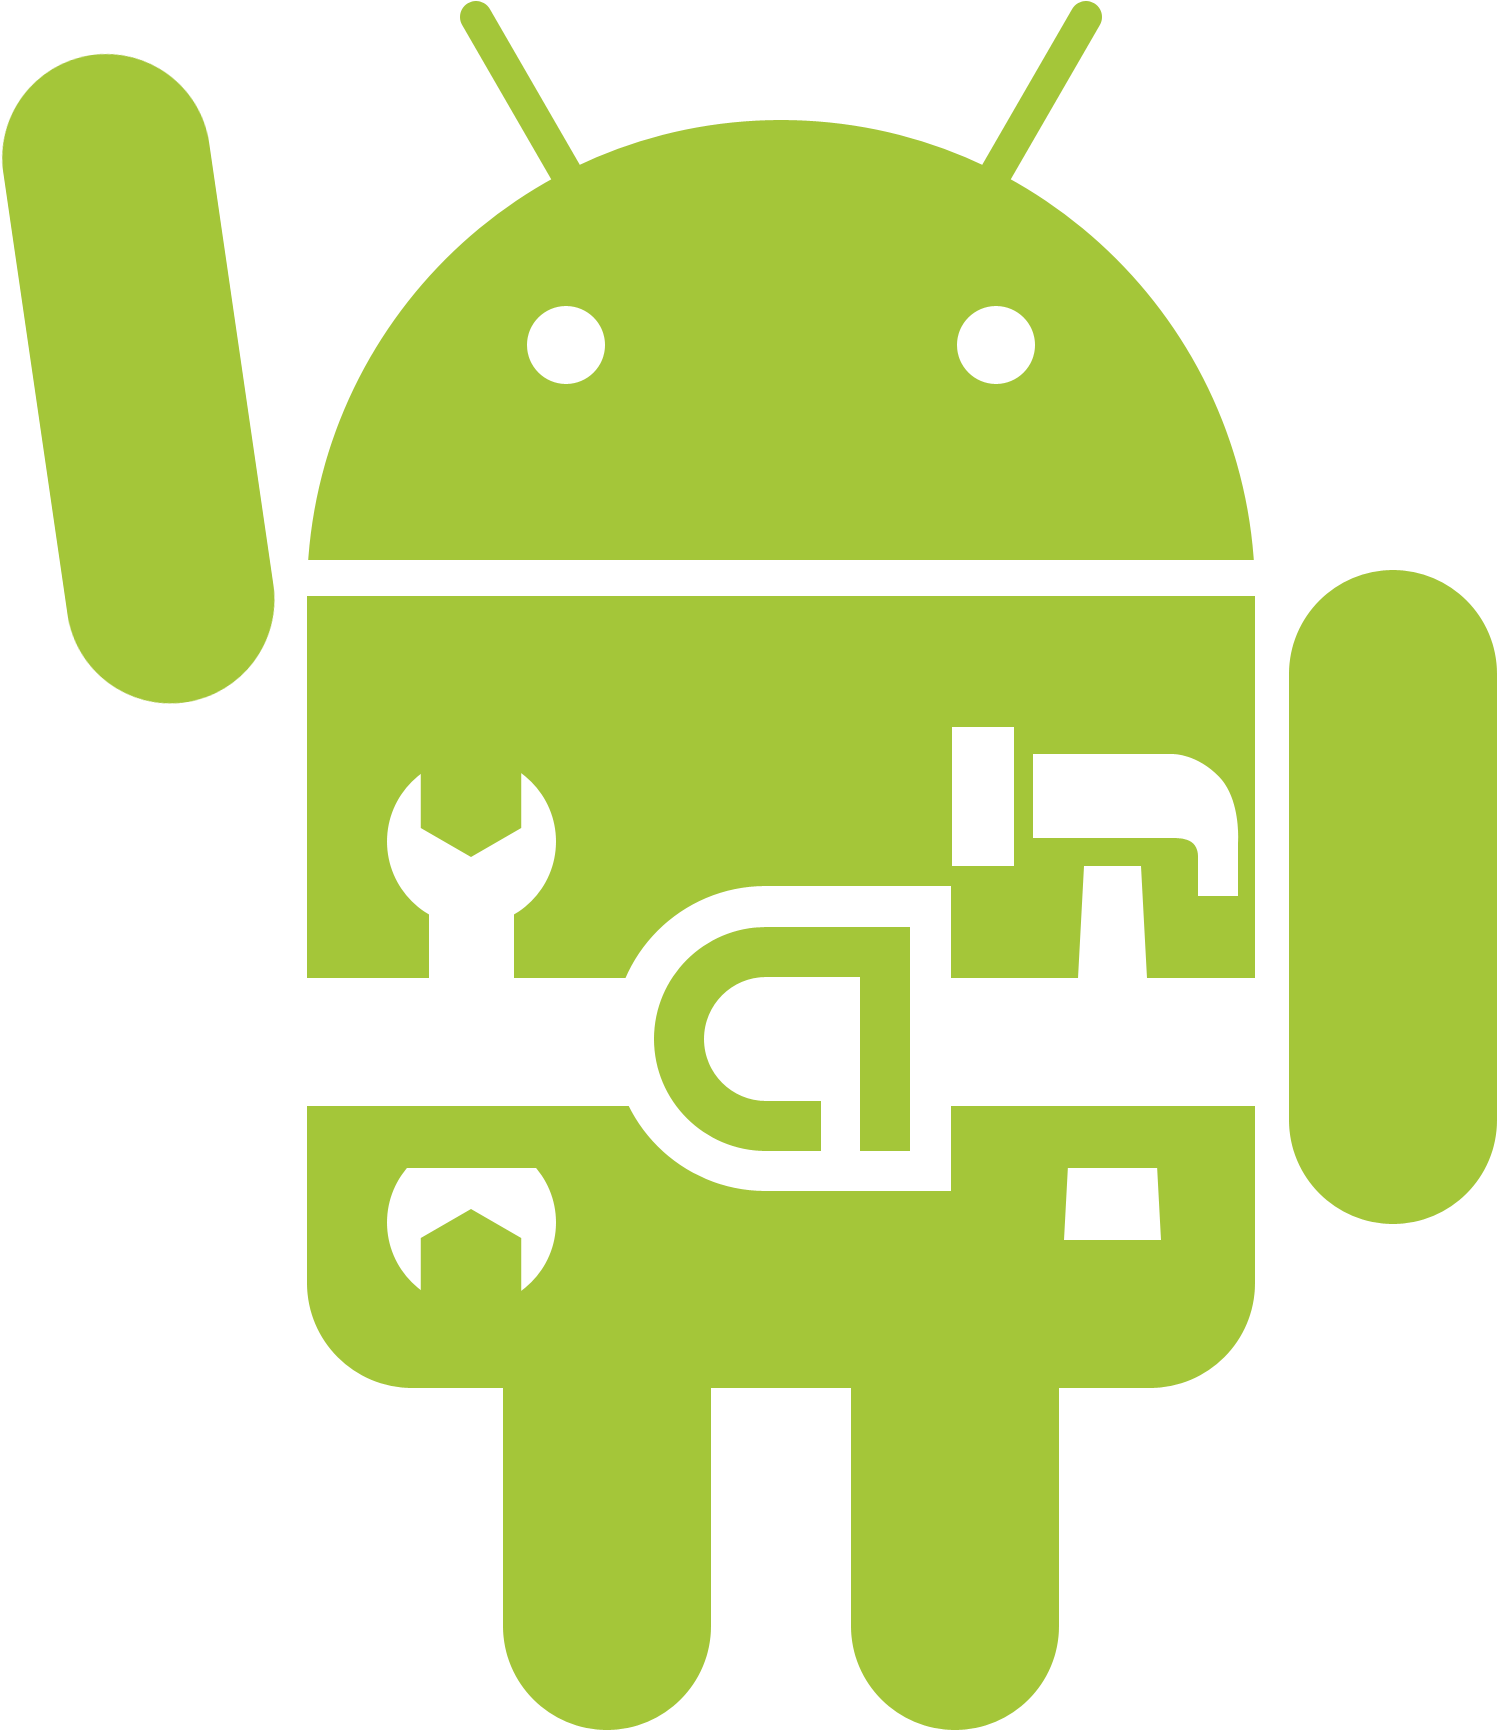 Android года выпуска